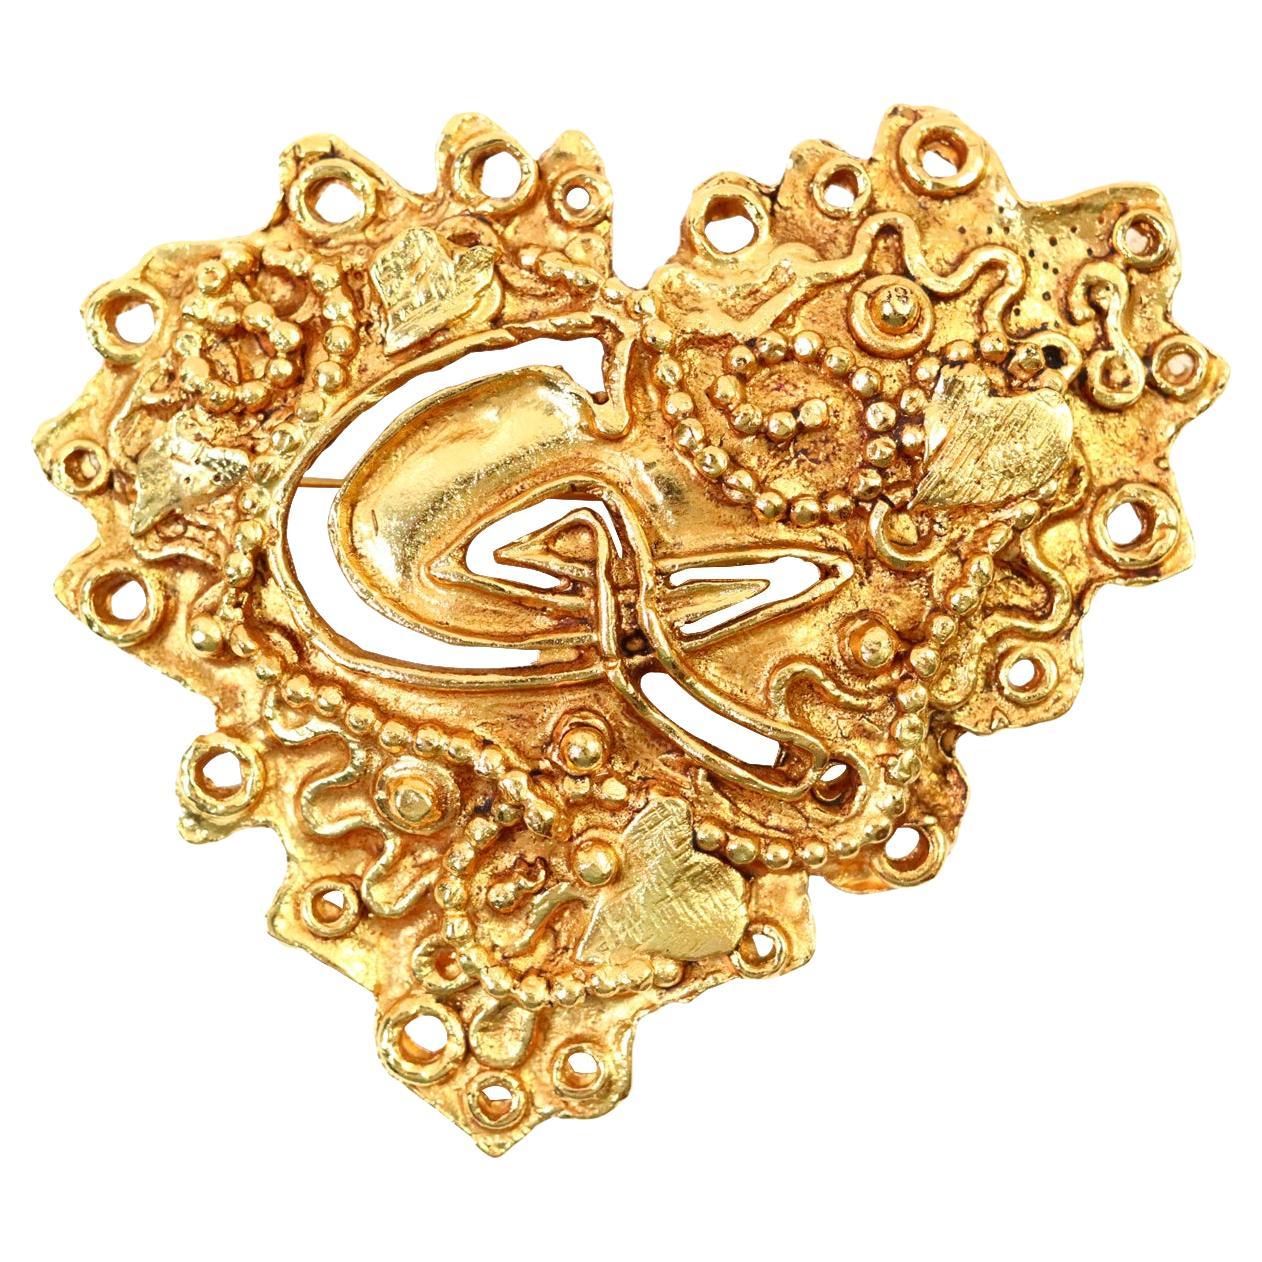 Vintage Christian Lacroix Gold Tone Heart Brooch Circa 1990s